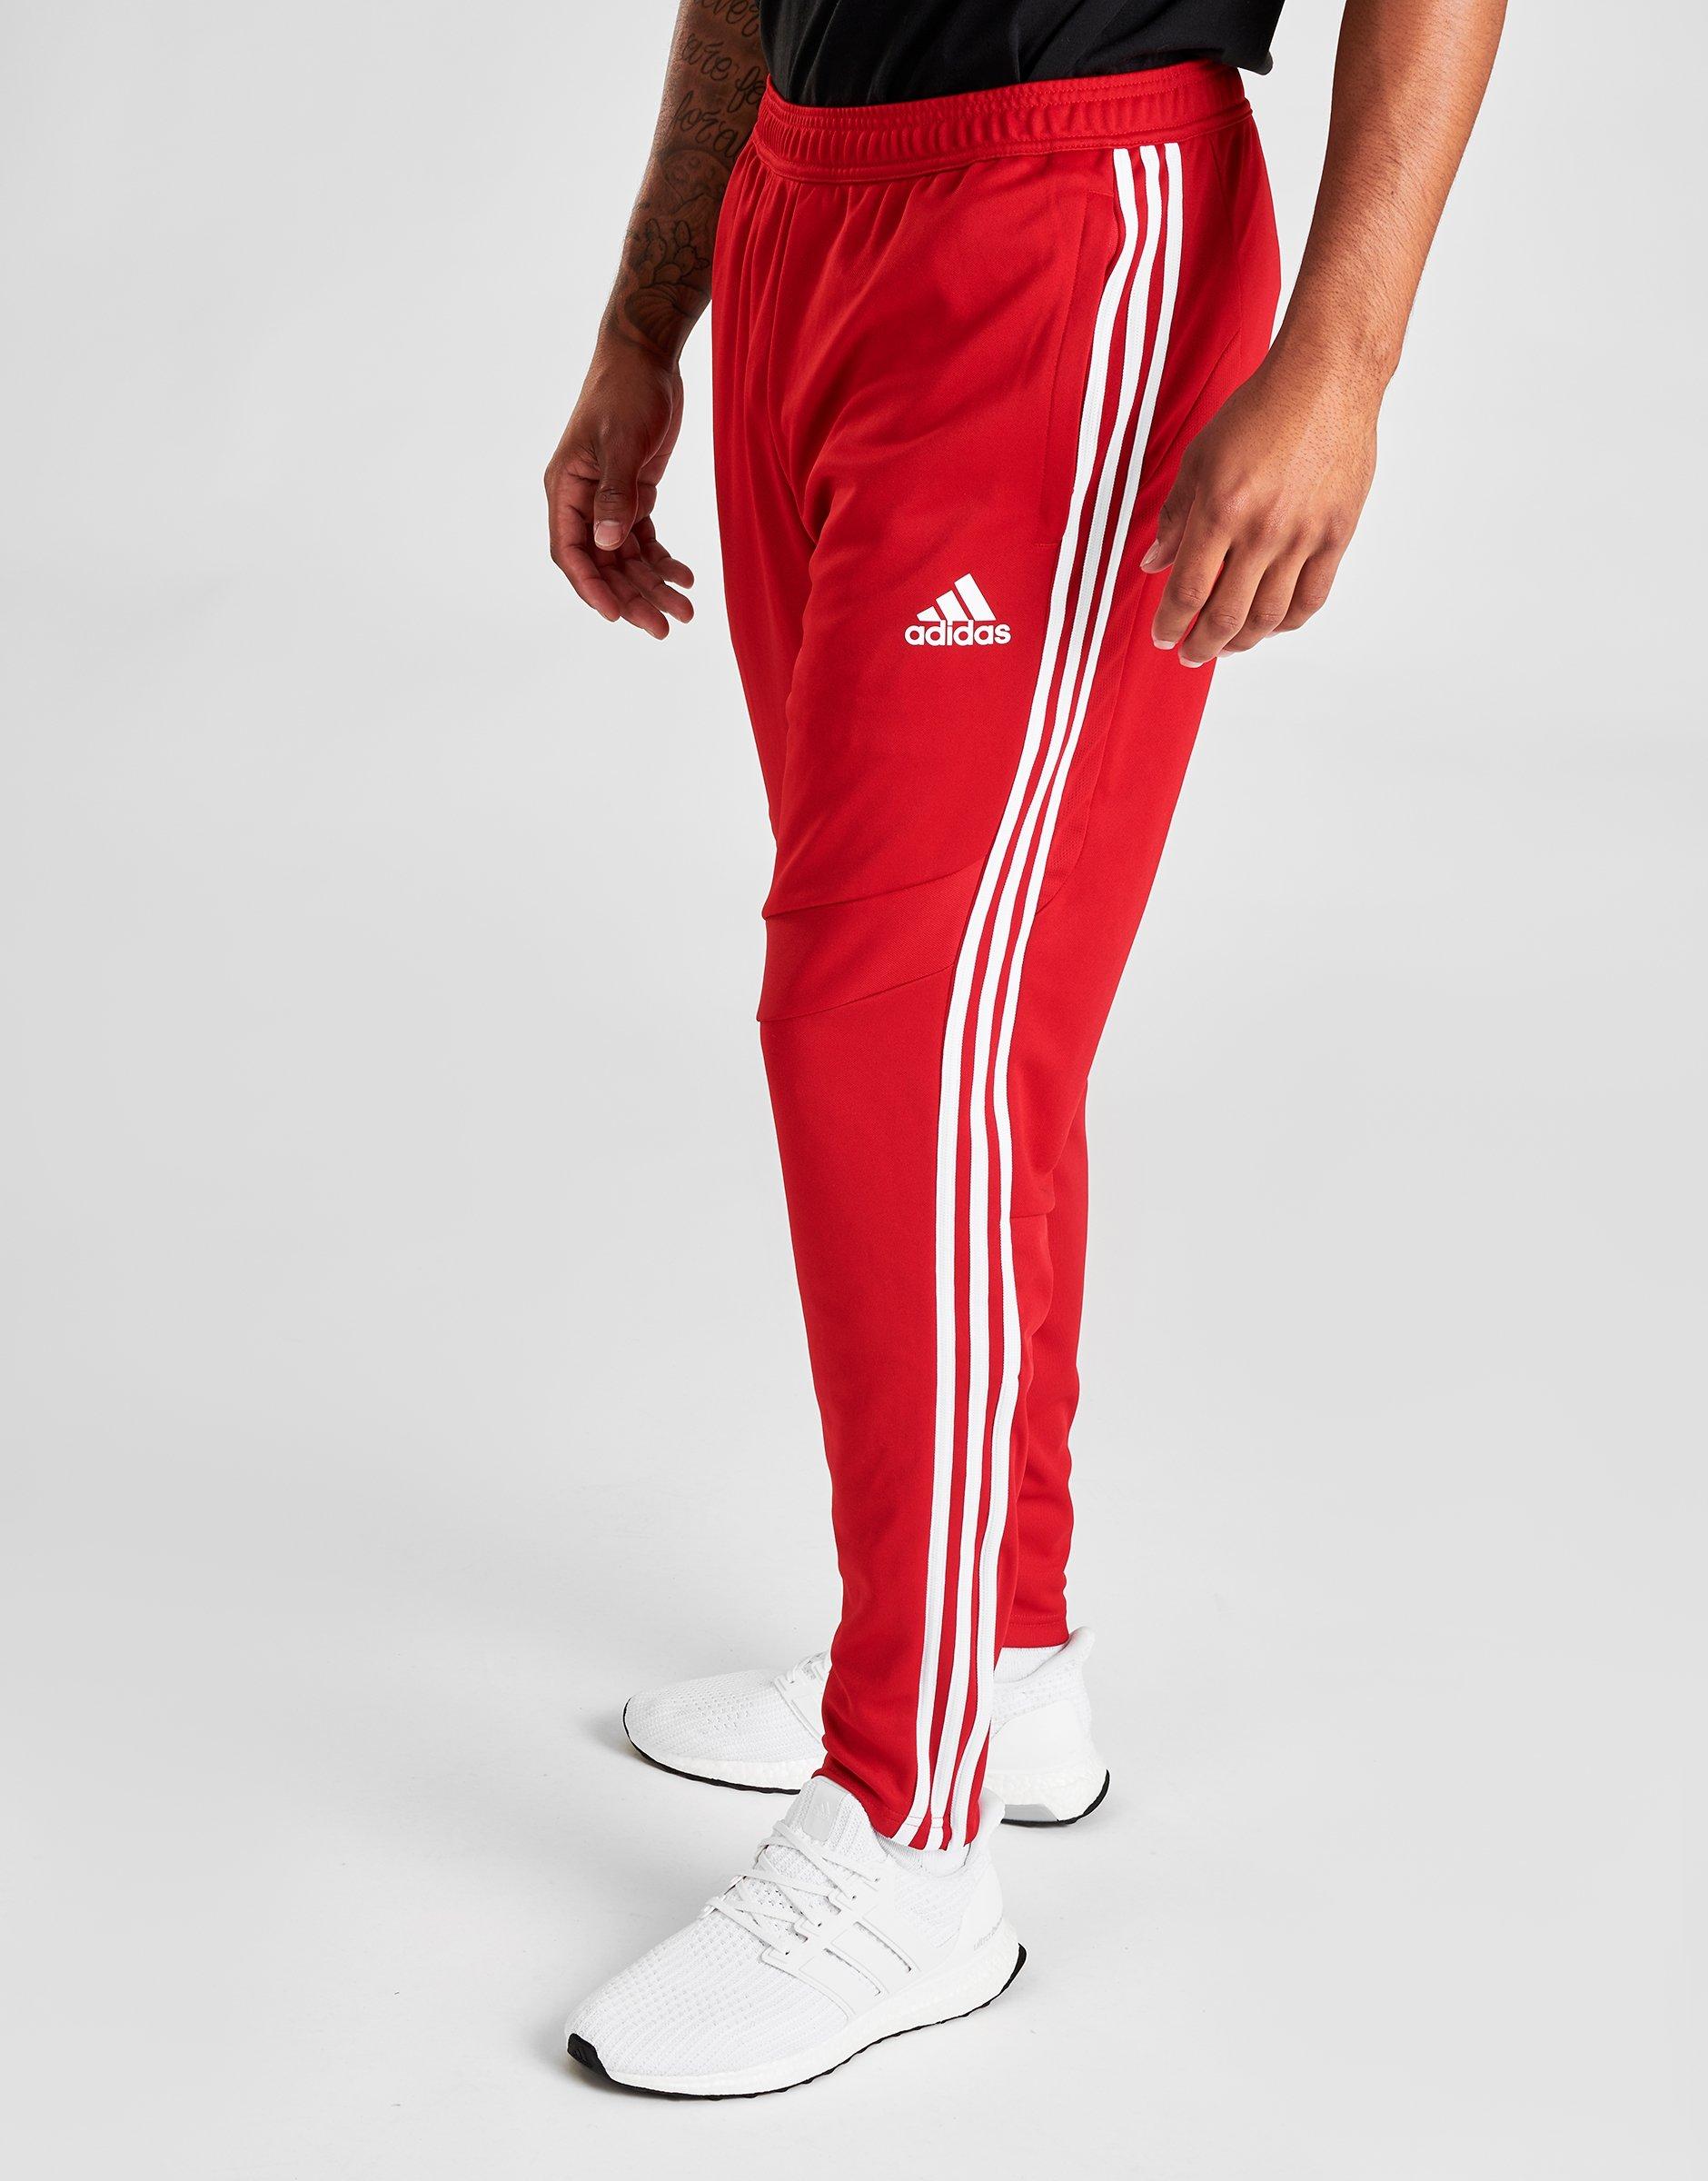 red training pants